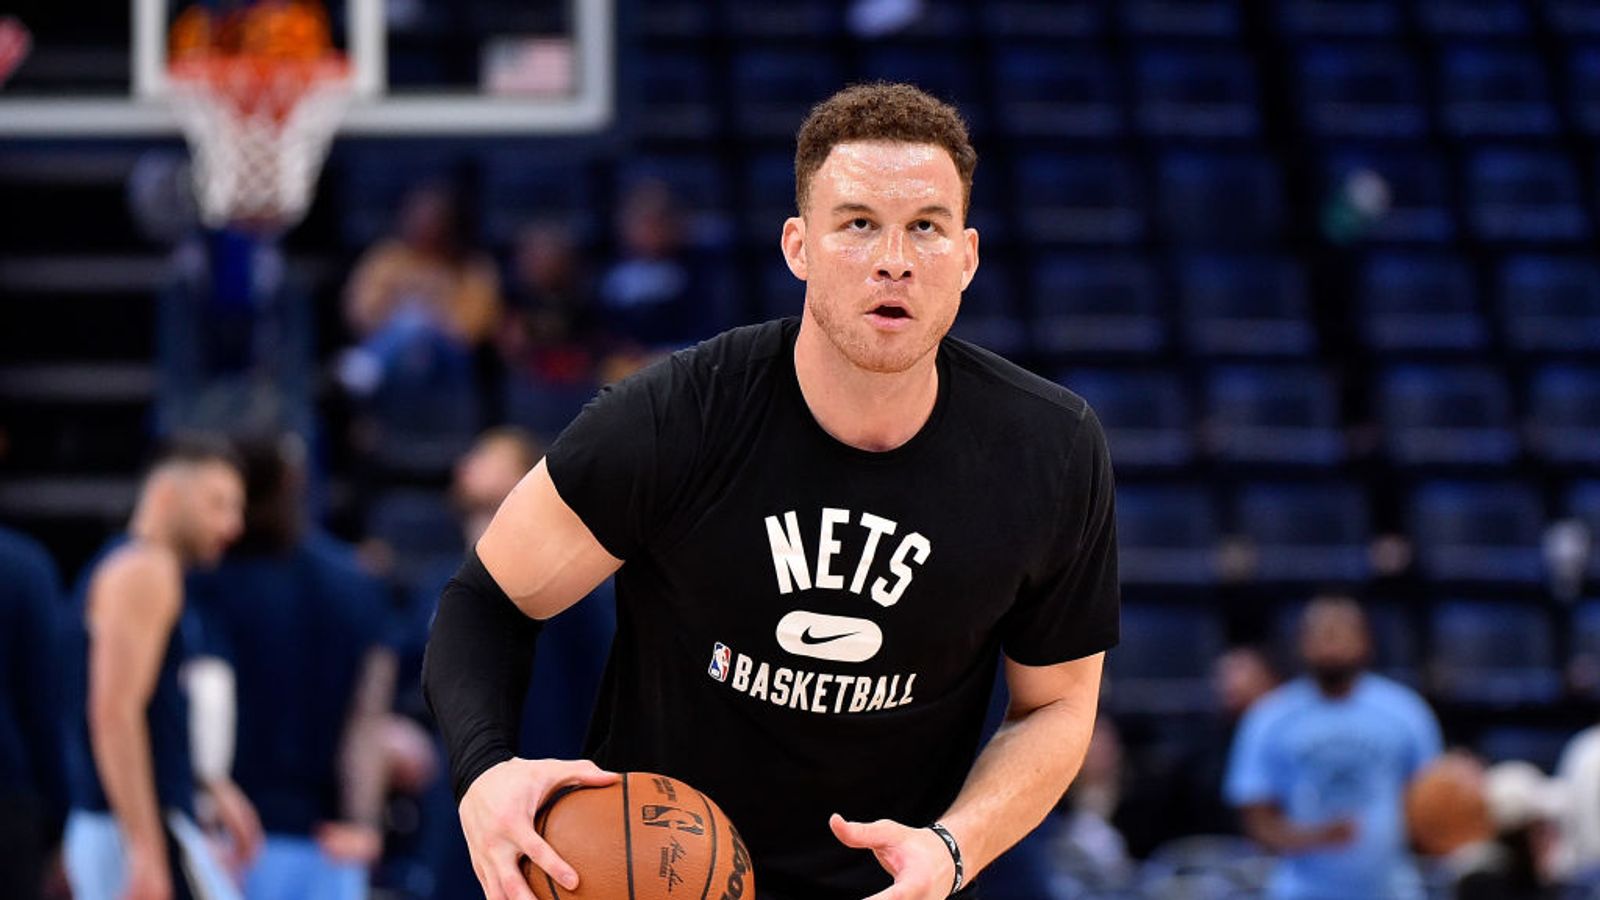 Celtic signing Blake Griffin to one-year minimum deal